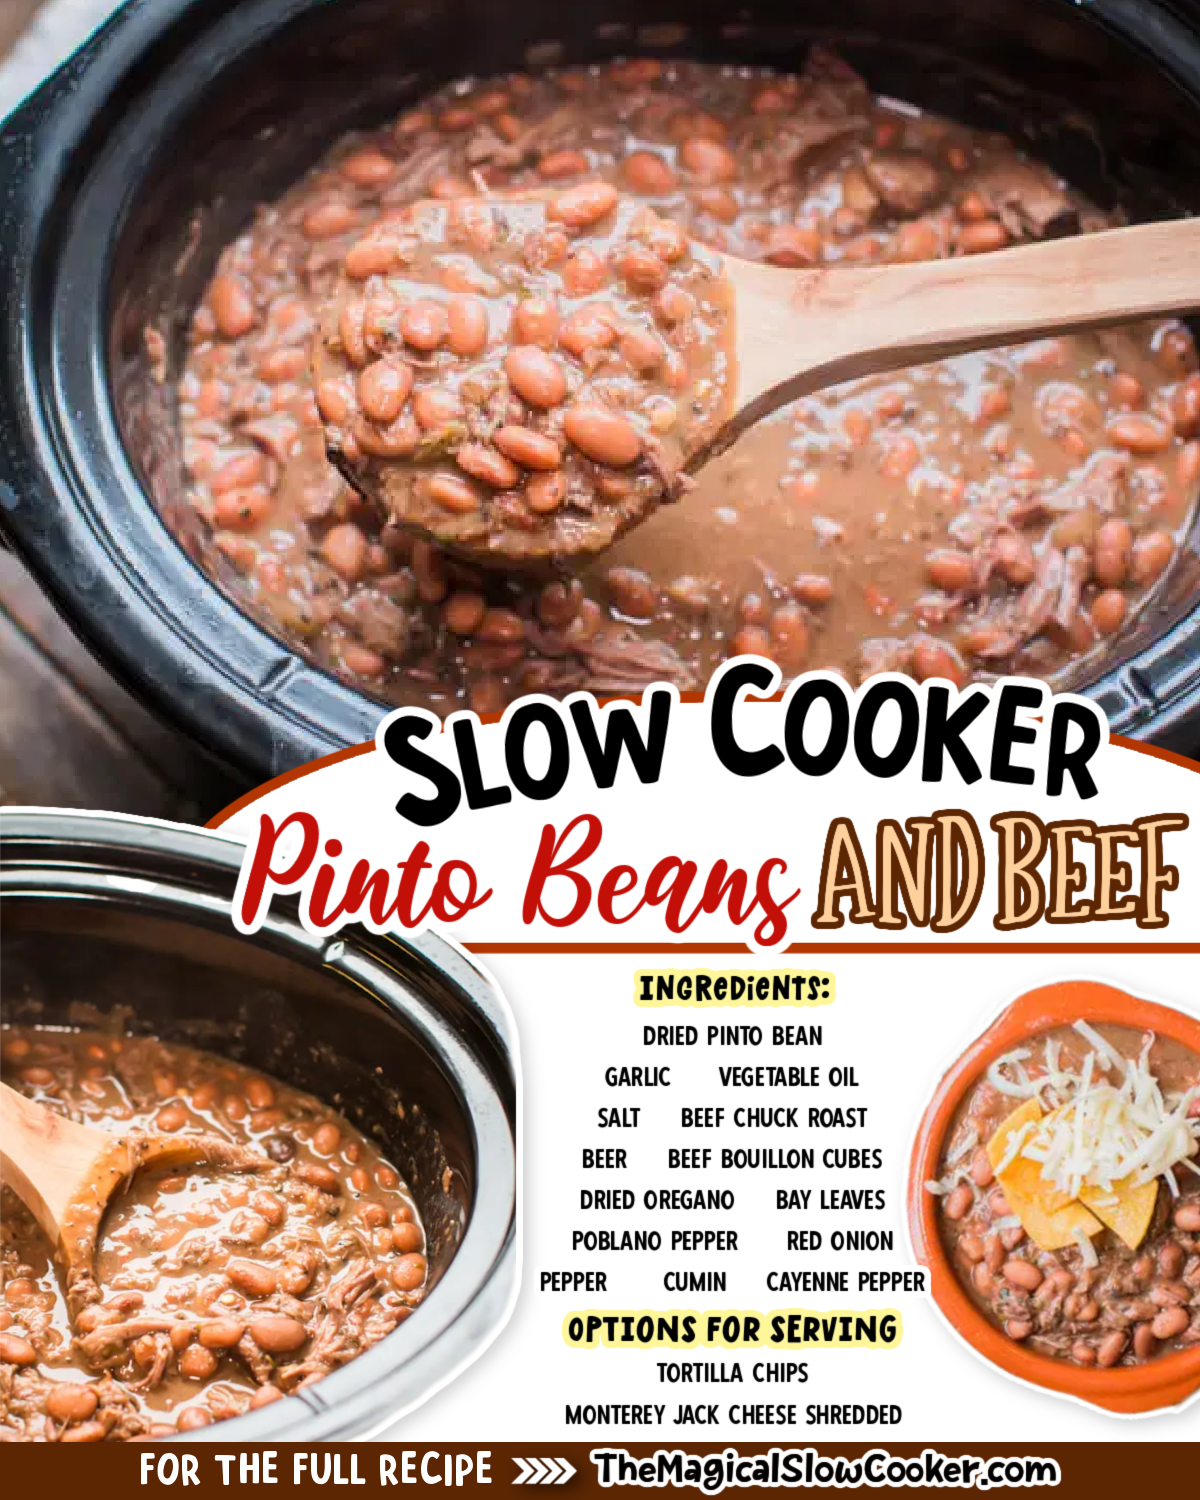 Pinto bean and beef images with text overlay for facebook and pinterest.